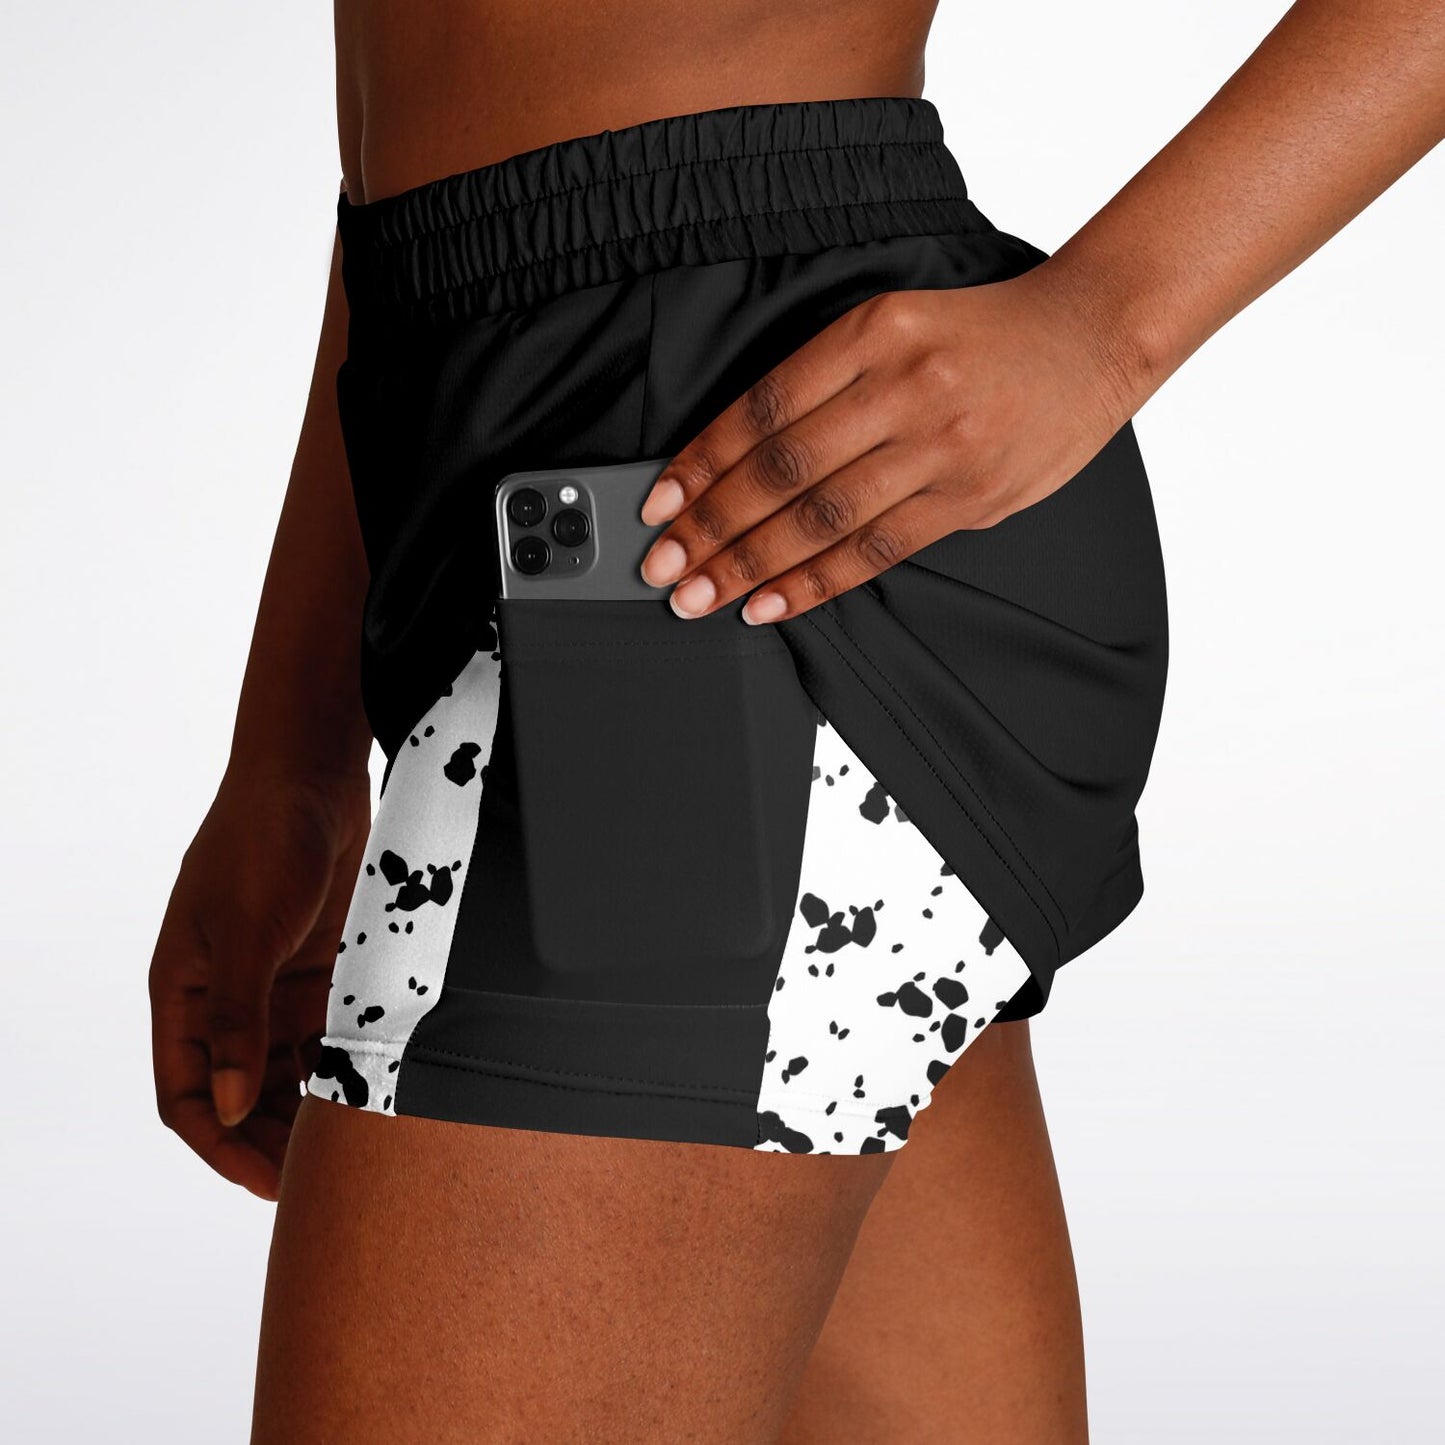 2 in 1 athletic shorts